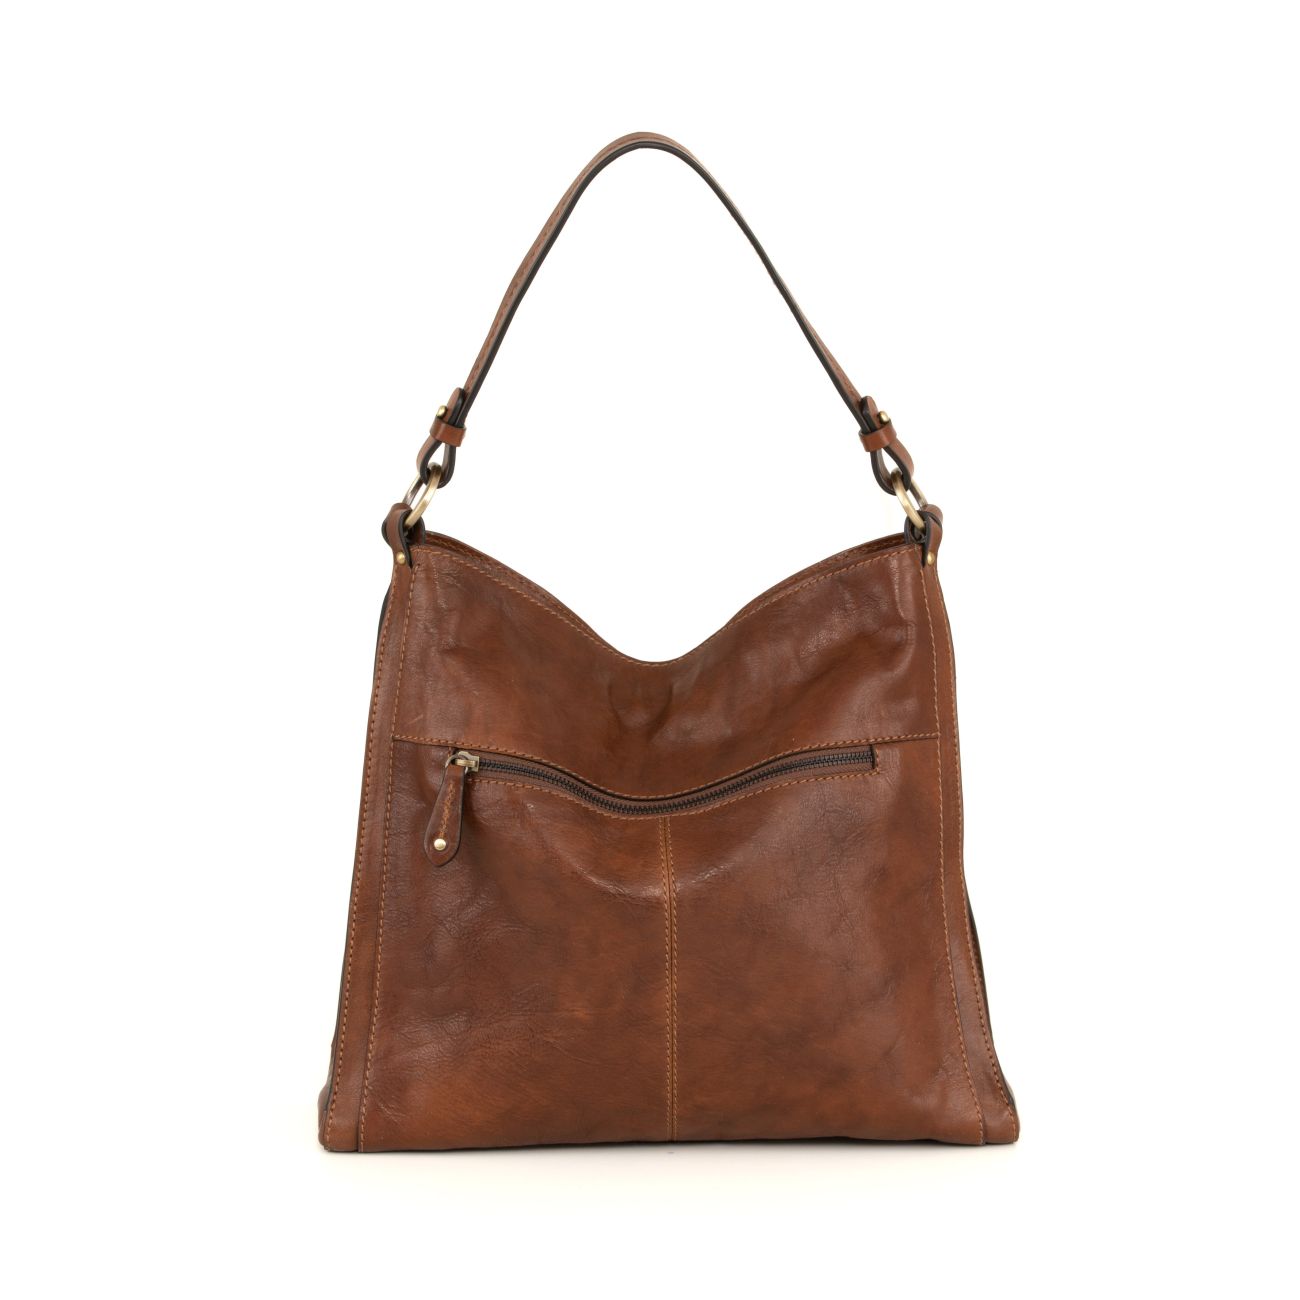 FLAMINIA Vegetable-Tanned Leather Shoulder Bag by Gianni Conti